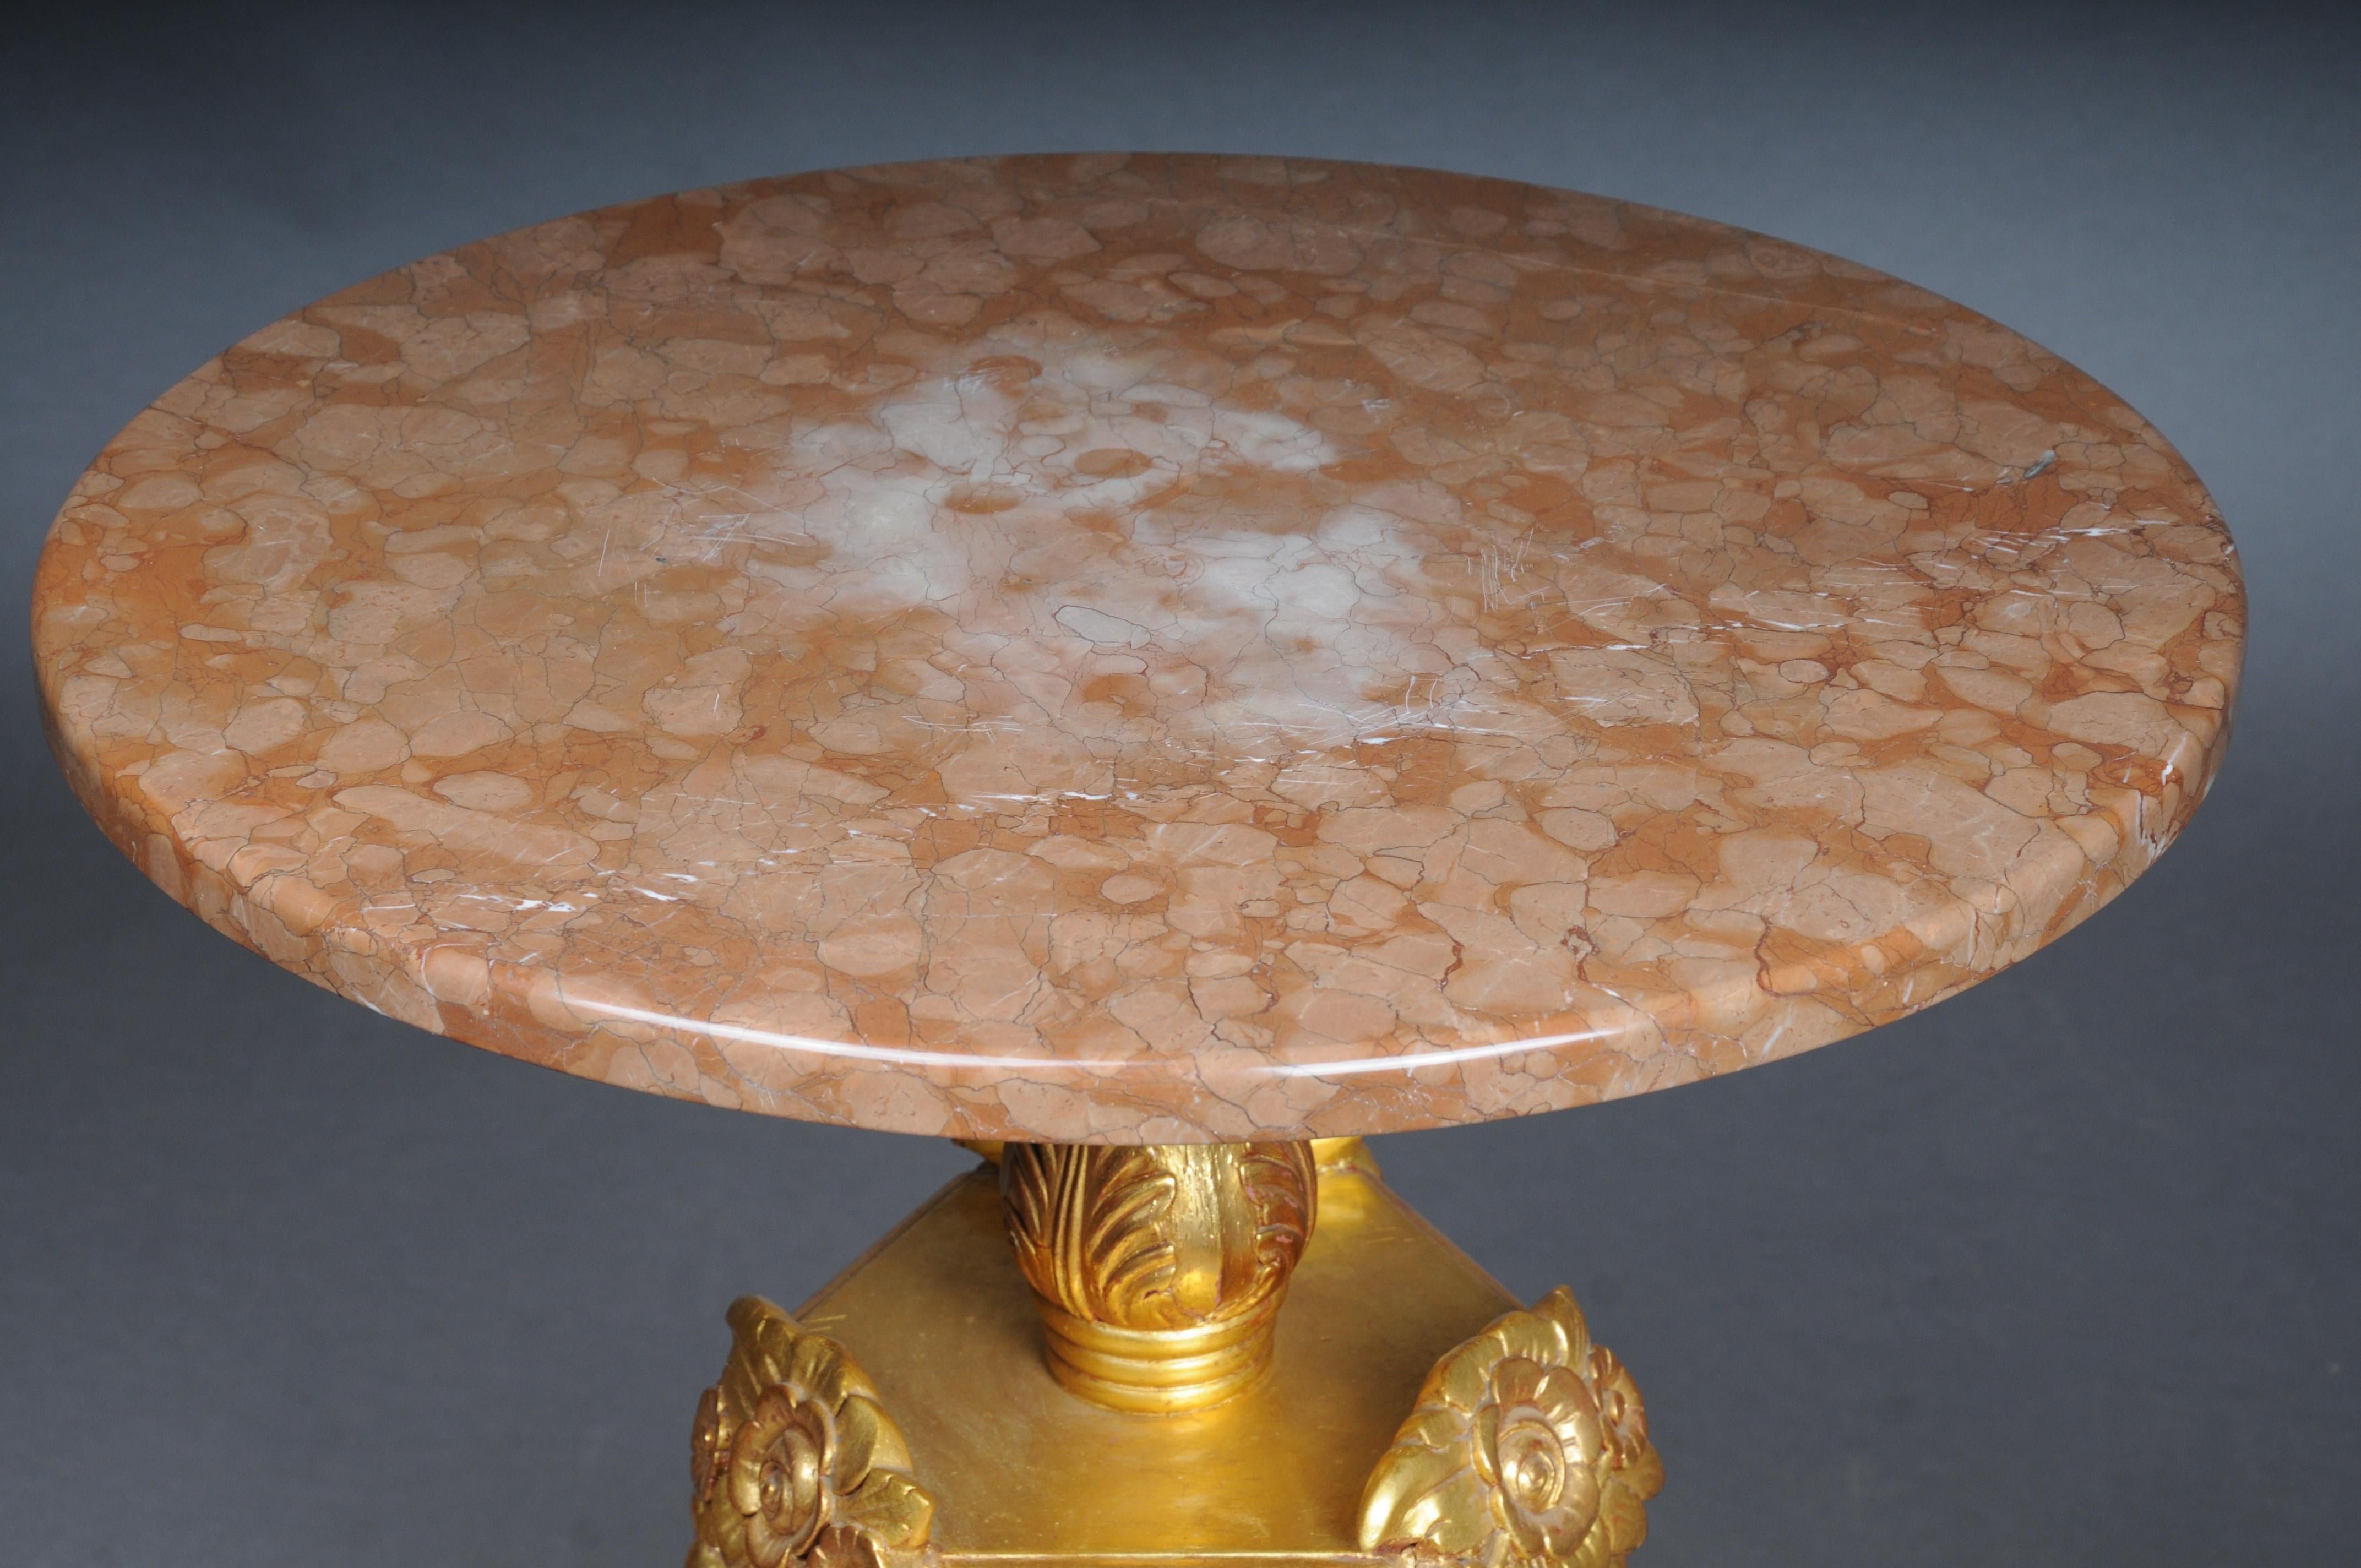 20th Century Royal ornate side table gilded with marble top

Rich ornate ceremonial table, wood, carved and gilded. Round marble slab on baluster with predatory heads and garlands
Corpus shaft flanked by three mythical creatures connected with